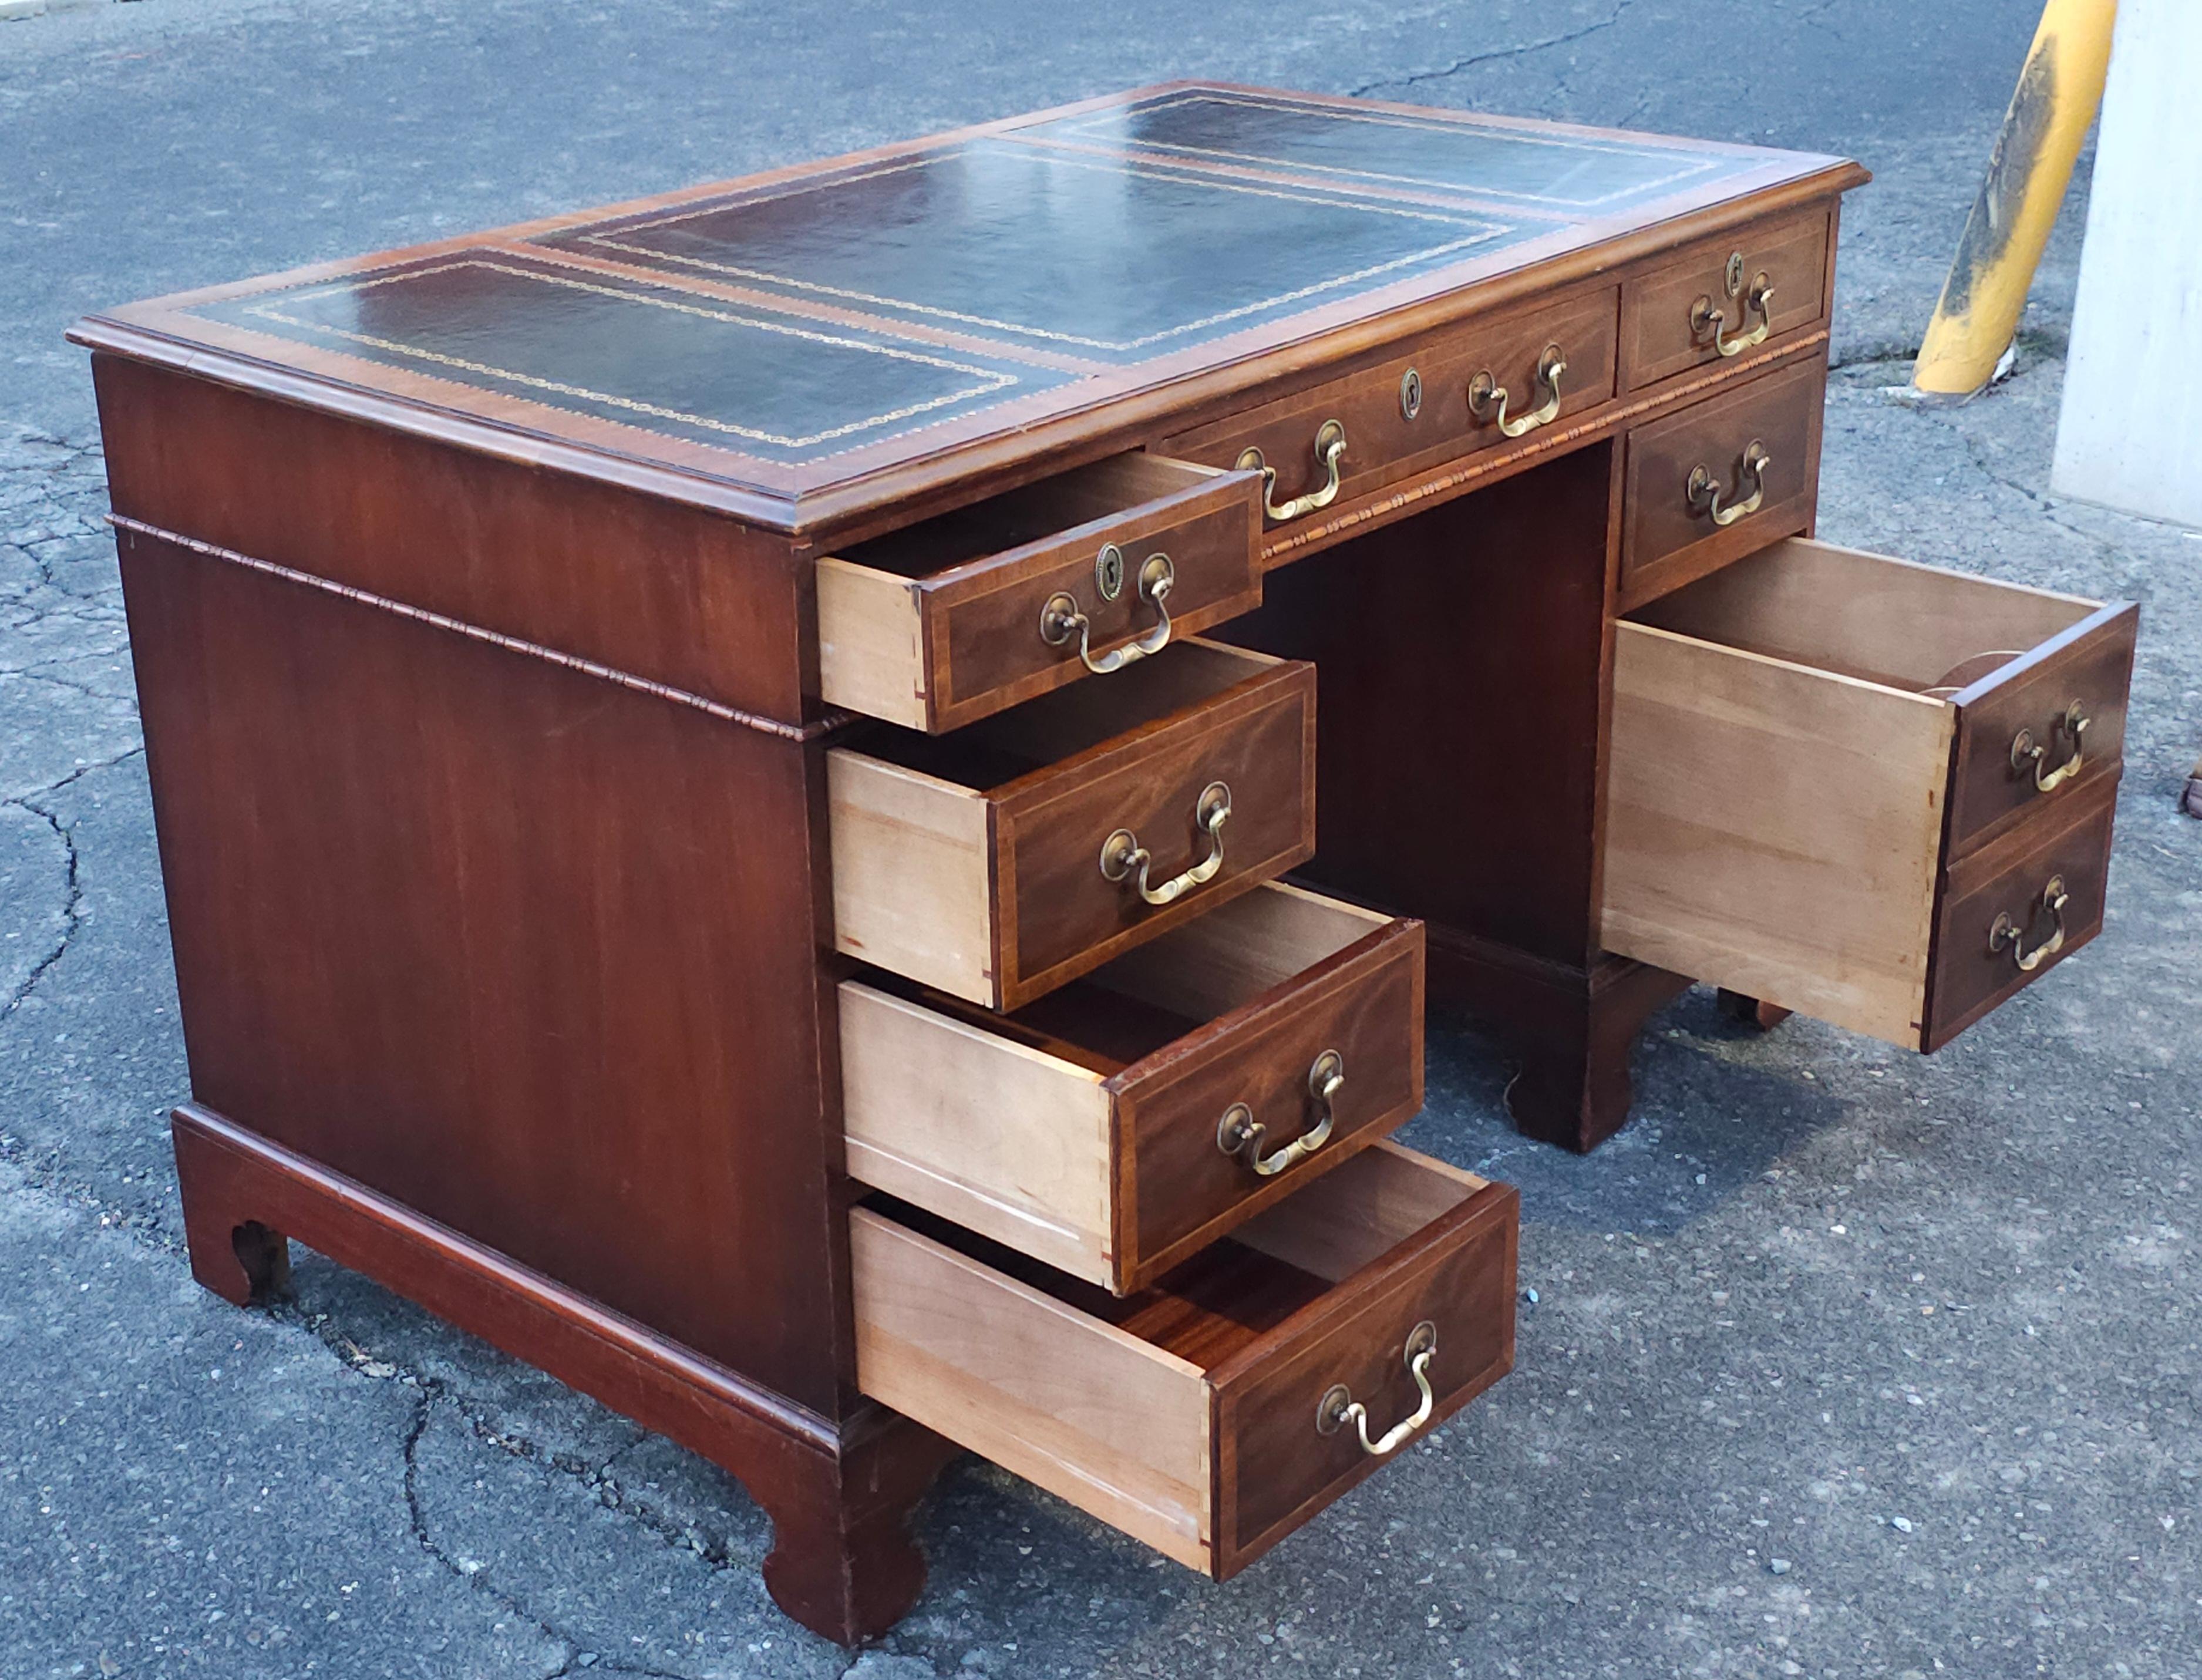 Hespeler Furniture Chippendale Mahogany Inlays and Green Leather Top Desk In Good Condition For Sale In Germantown, MD